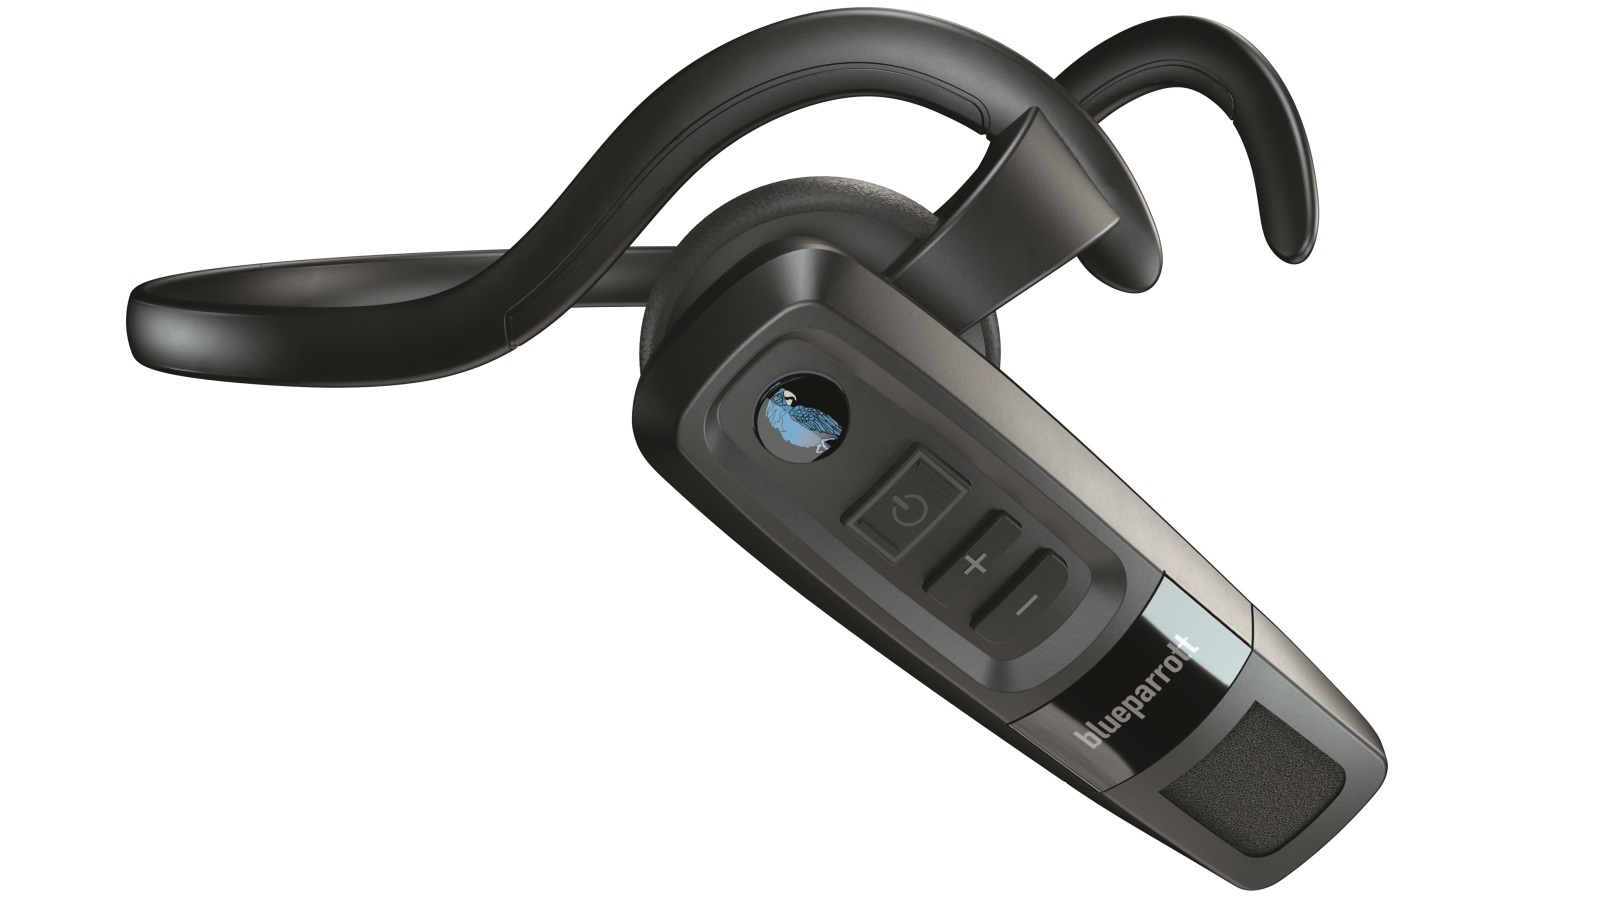  BlueParrott S450-XT Voice-Controlled Bluetooth Headset –  Industry Leading Sound with Long Wireless Range, Extreme Comfort and Up to  24 Hours of Talk Time, Black, Stereo : Cell Phones & Accessories